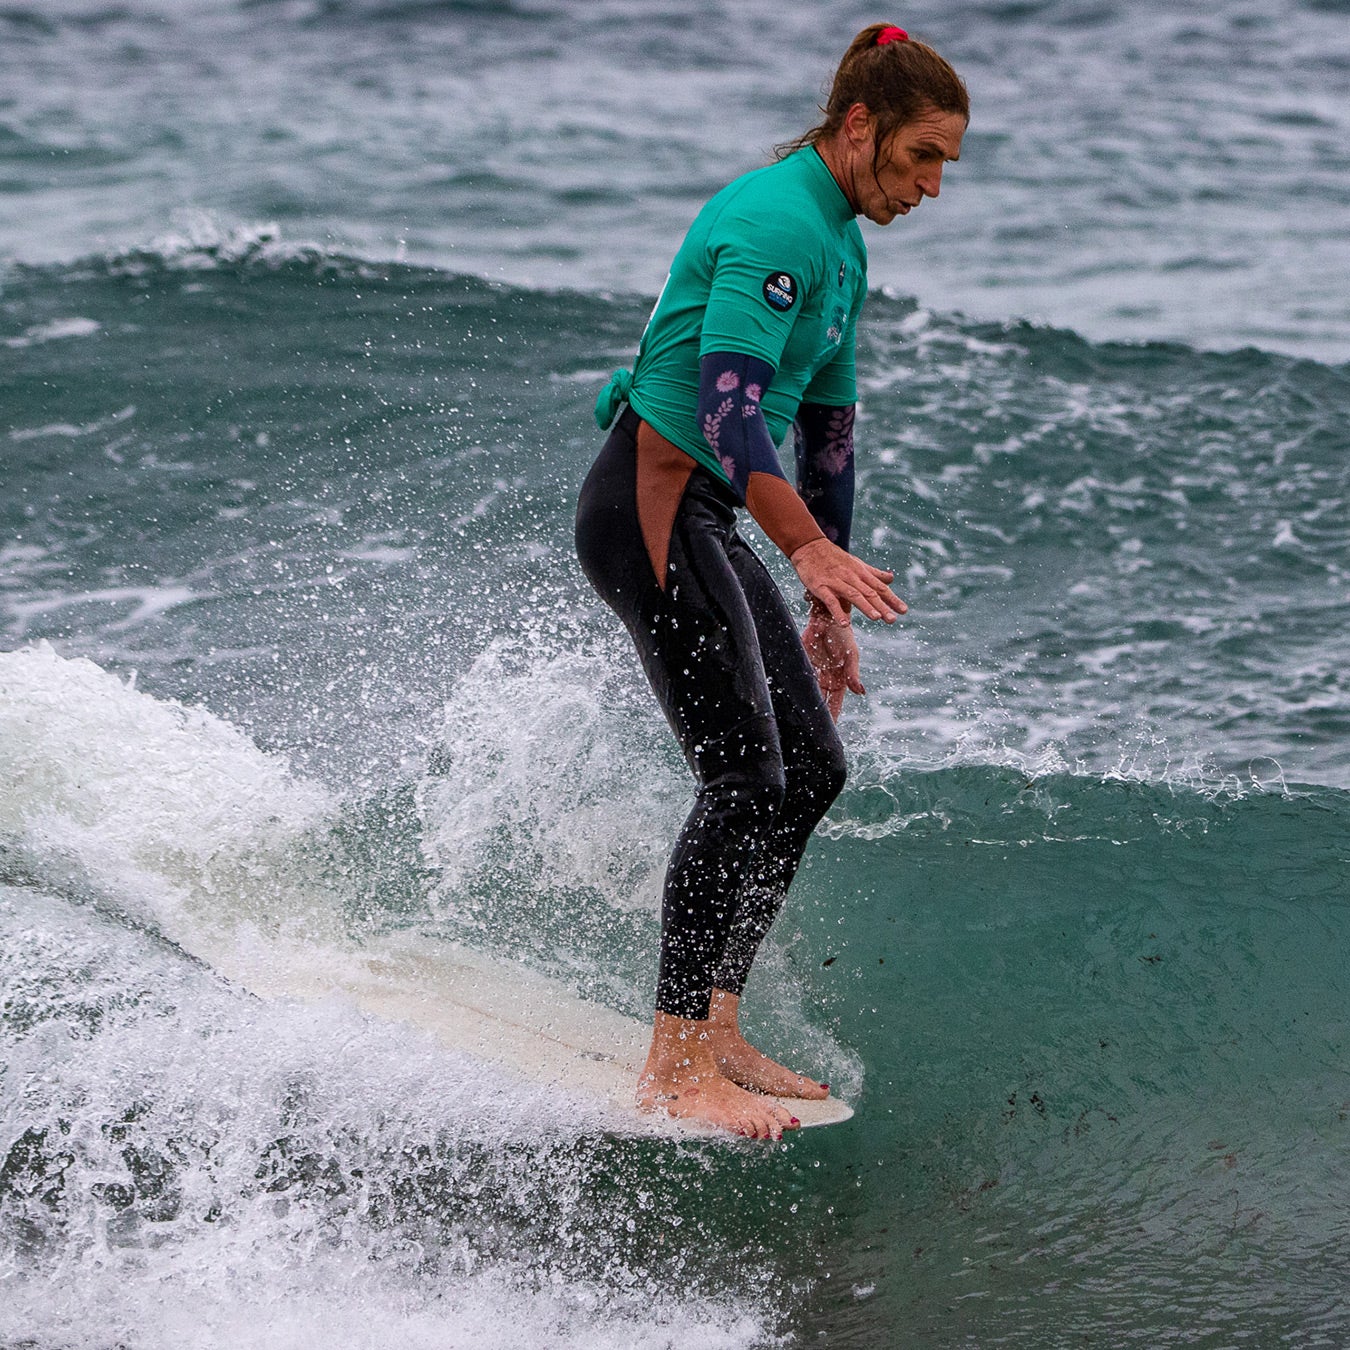 Pro Surfing Allows Transgender Athletes to Compete. Cue the Backlash.